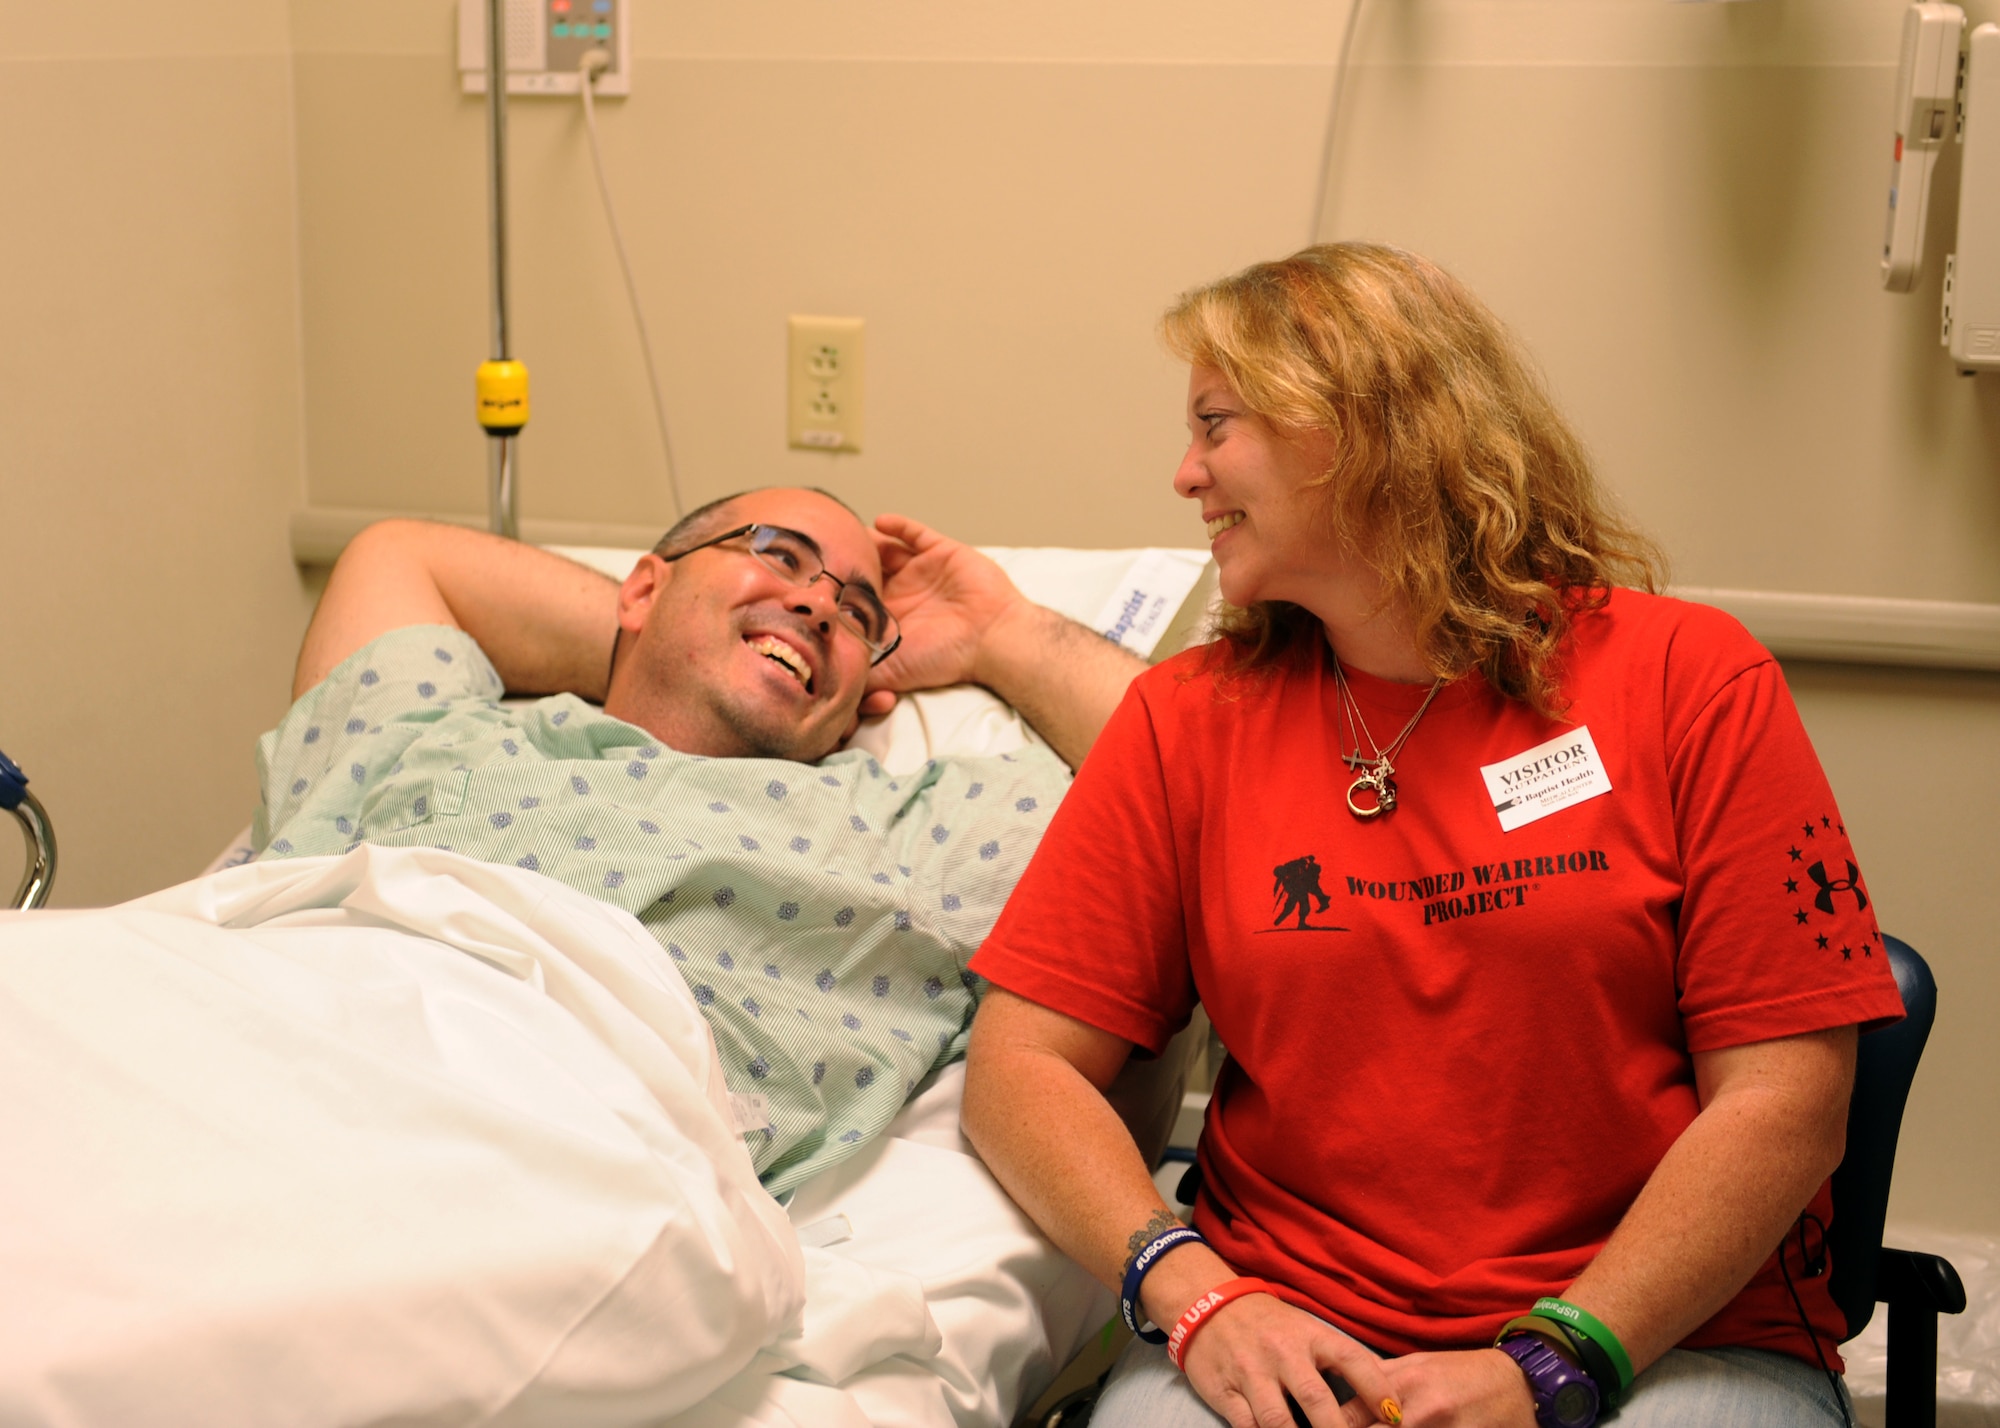 Tech. Sgt. Jason Caswell, a 19th Aircraft Maintenance Squadron crew chief, along with his wife, Tami, share a moment before he enters surgery Oct. 17, 2014, at Baptist Health Medical Center, Little Rock, Ark. Caswell injured his leg while playing rugby, and has suffered multiple complications, which  led up to his leg being amputated. (U.S. Air Force photo by Airman 1st Class Scott Poe)